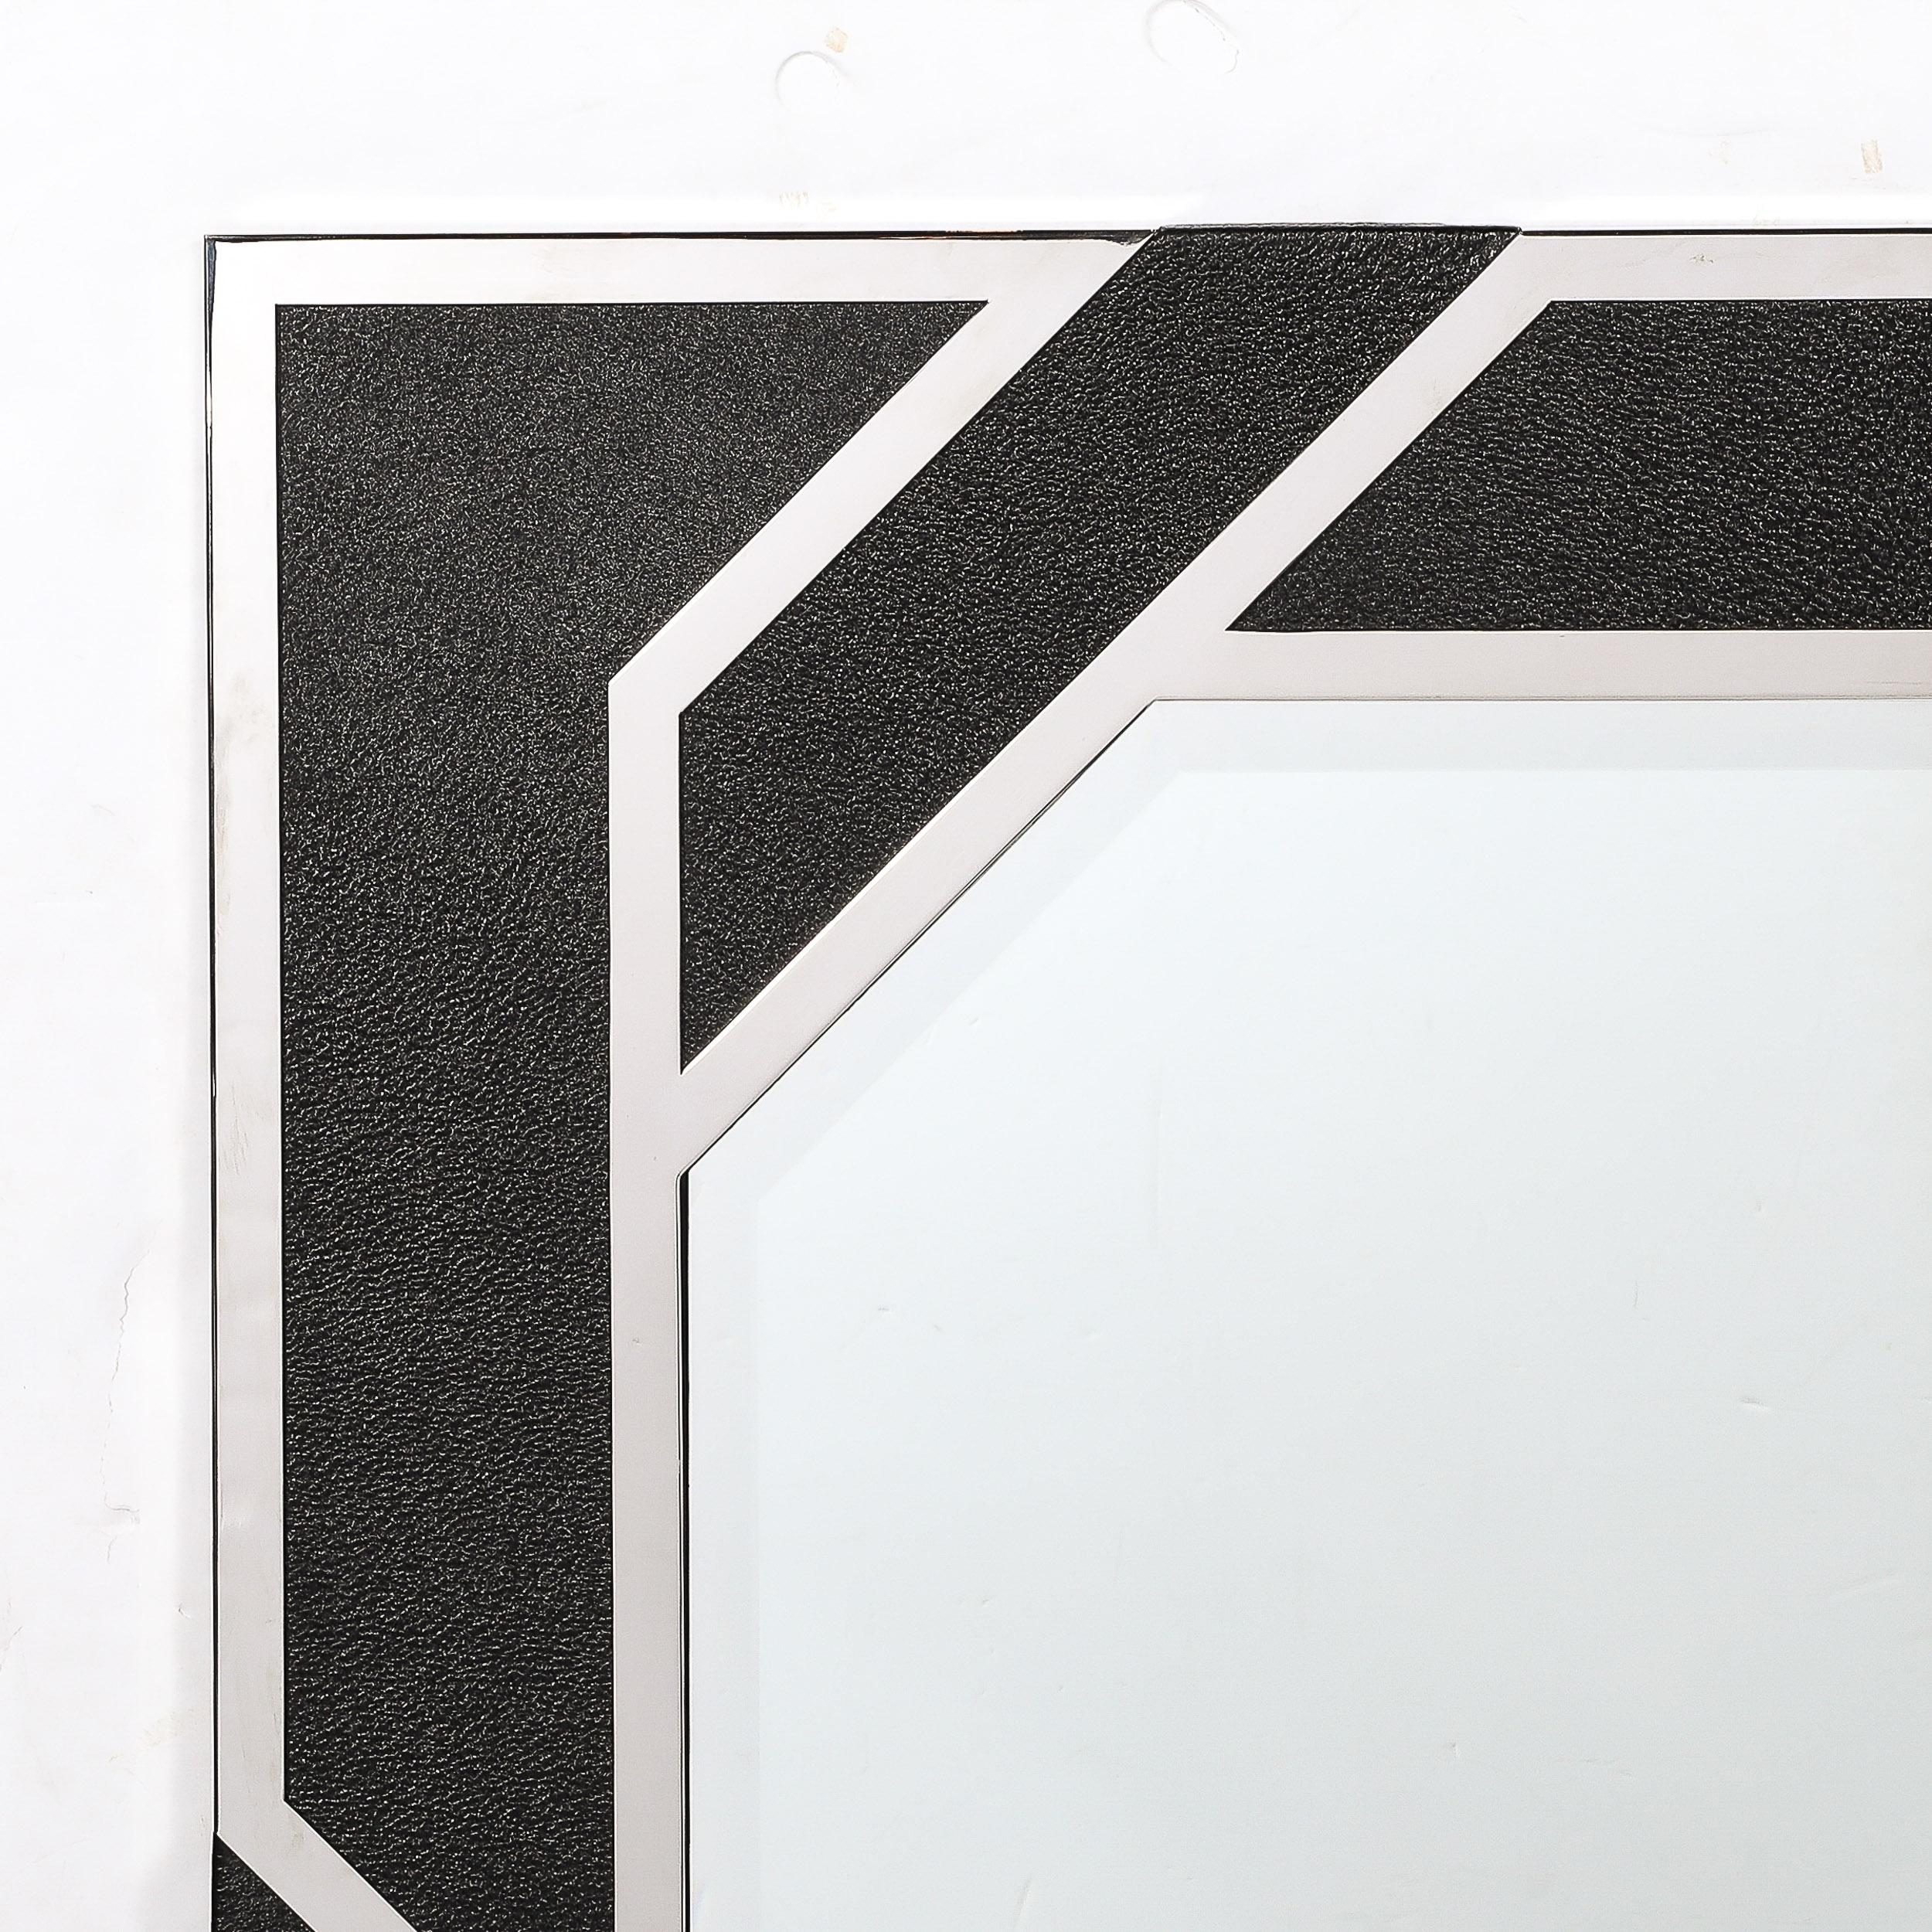 20th Century Modernist Embossed Leather & Chrome Spiral Form Geometric Mirror by Lorin Marsh For Sale